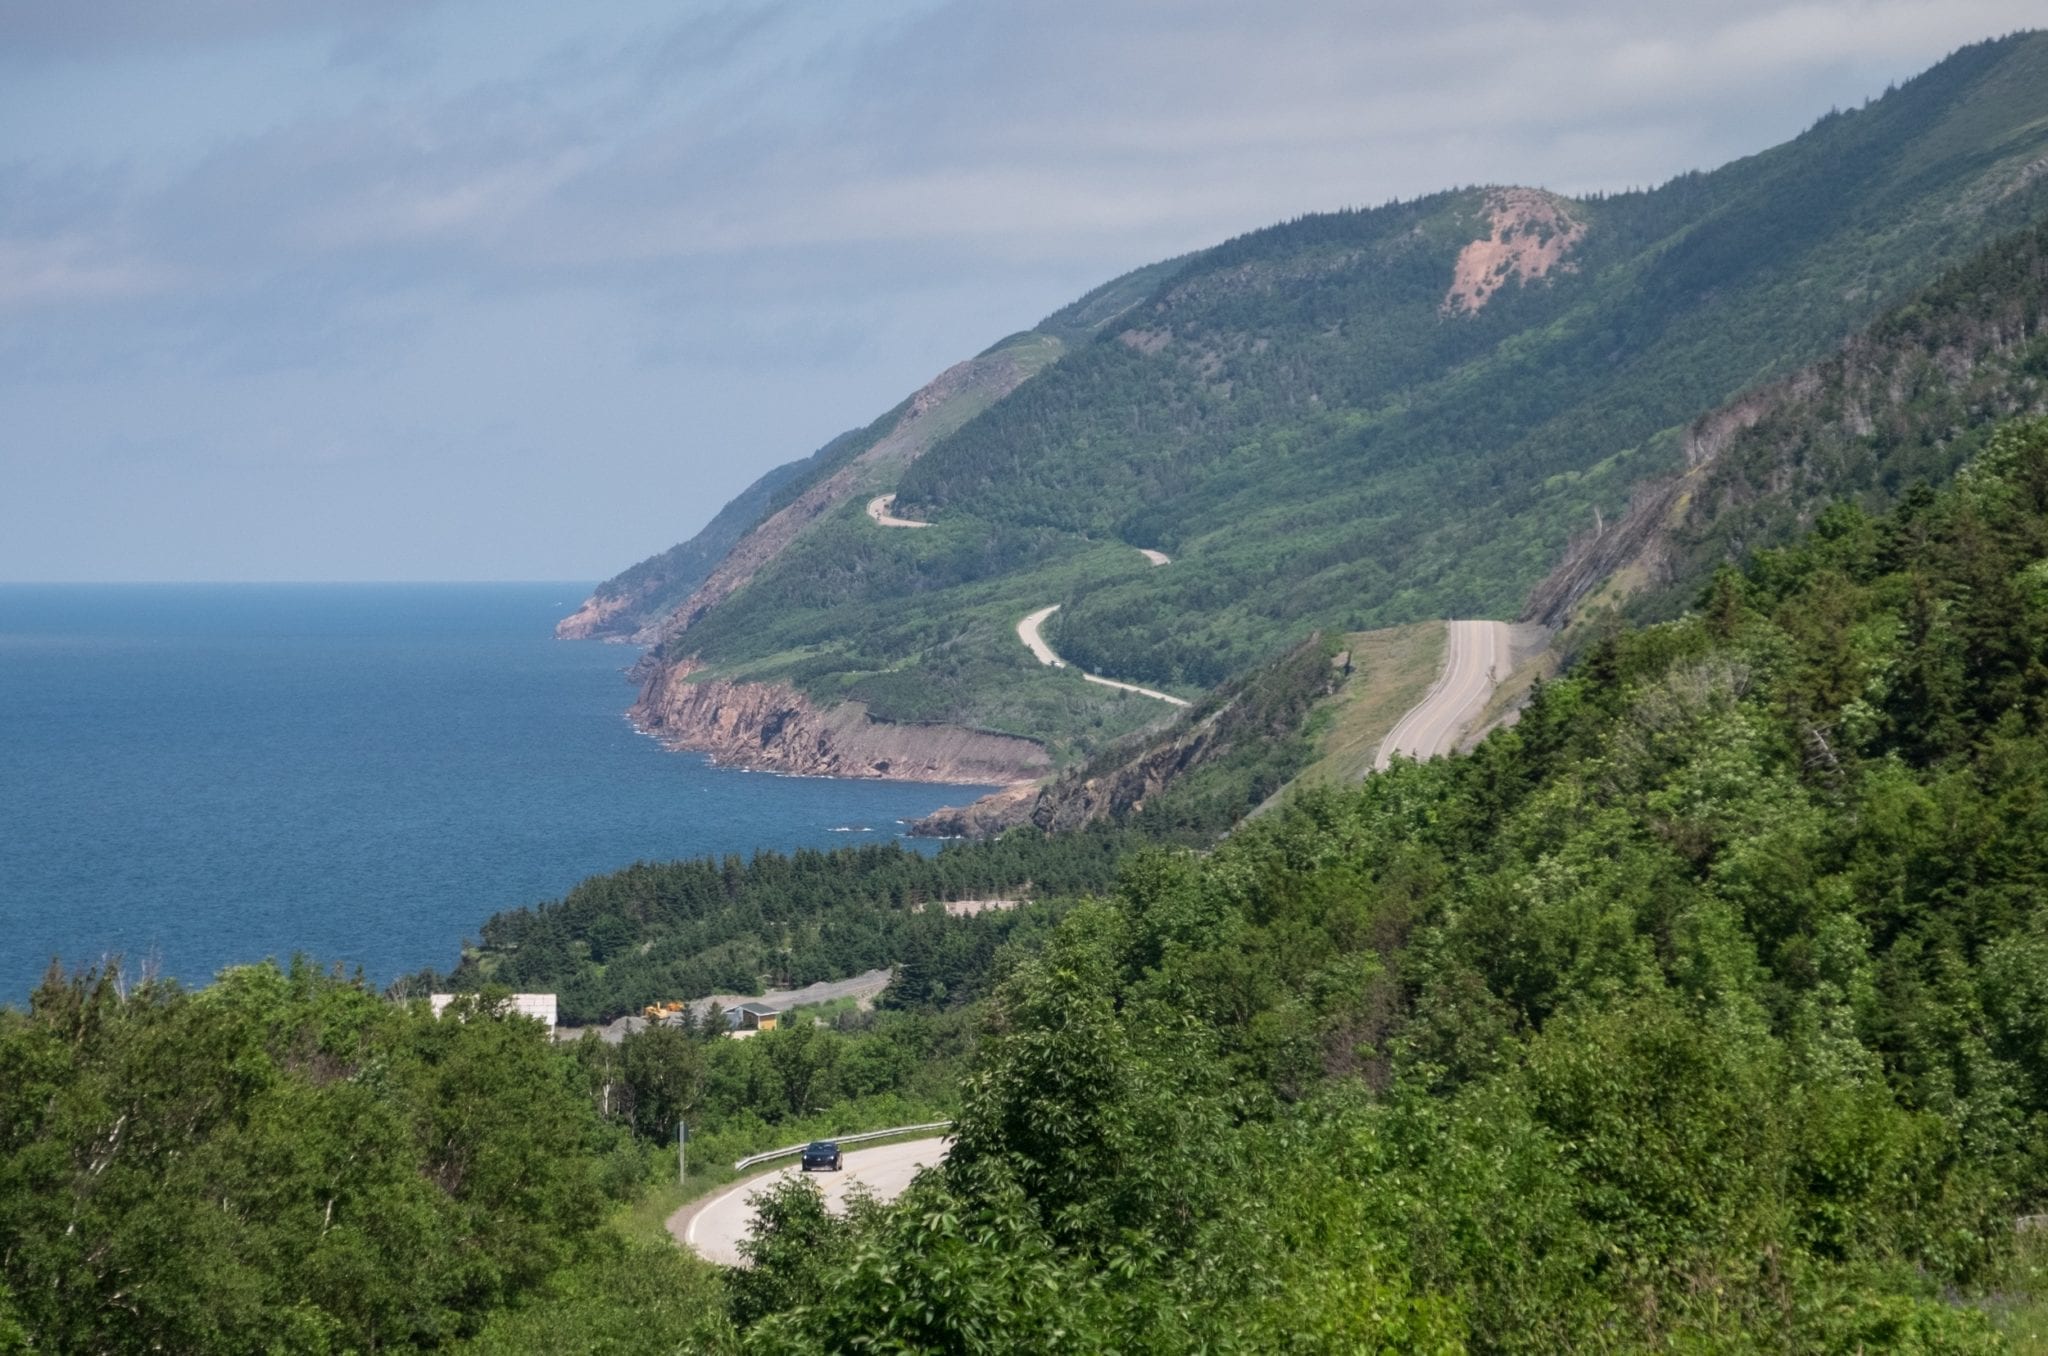 The mountains and winding roads of Cape Breton Highlands National Park.